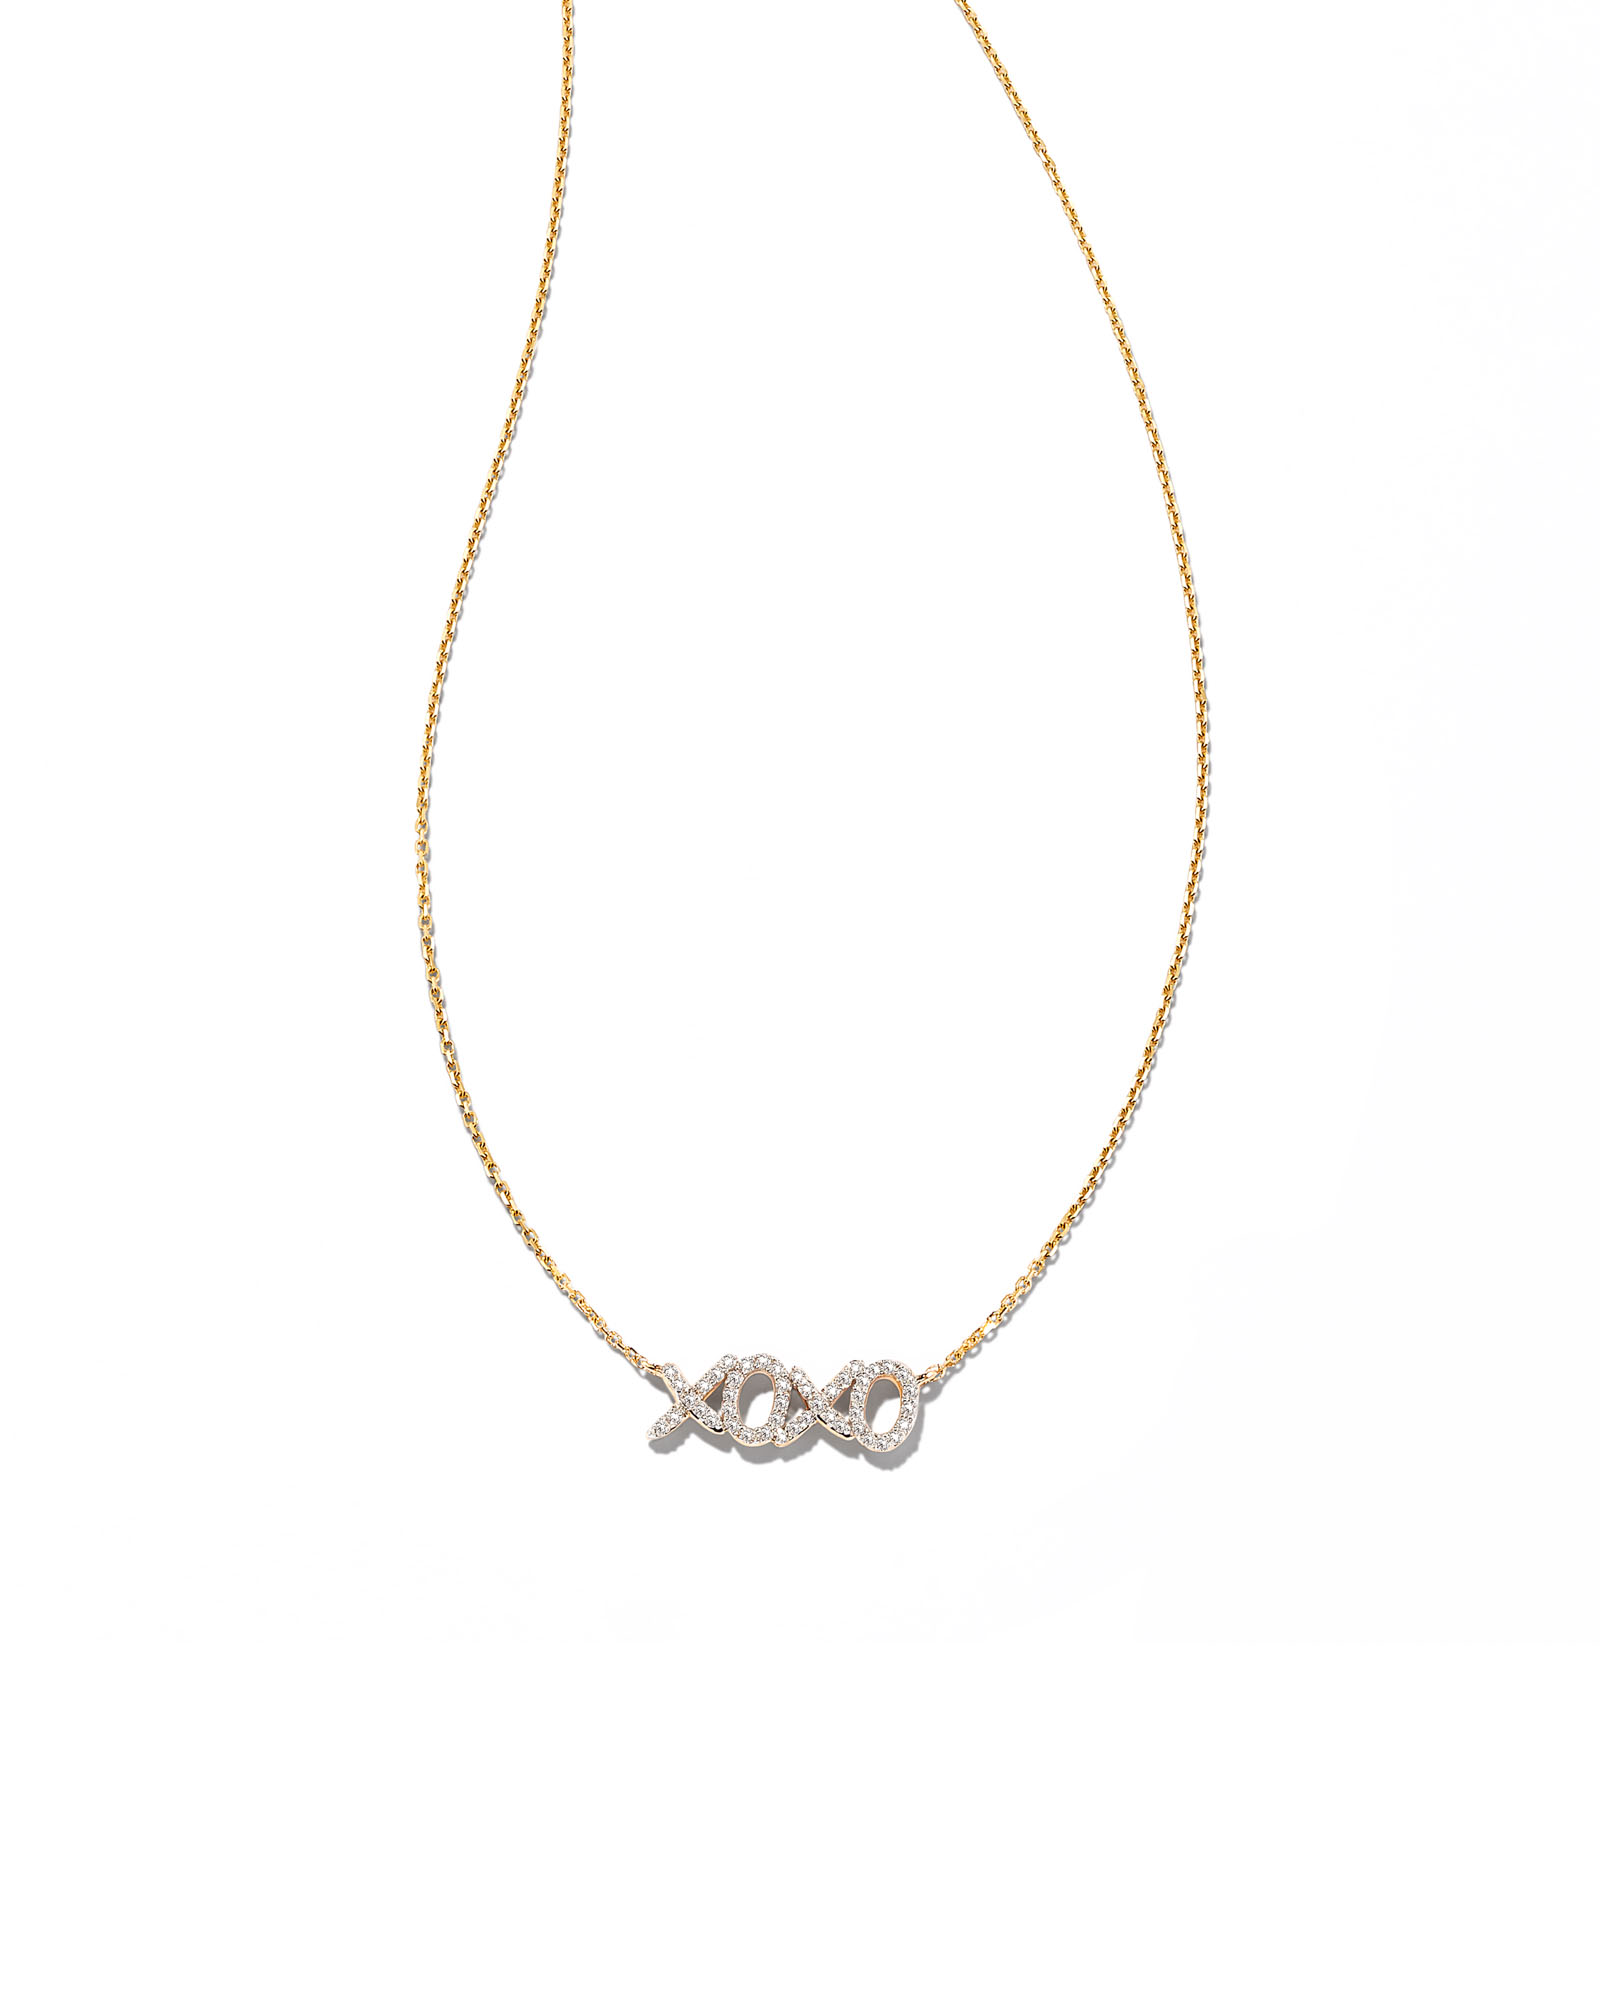 XO' Necklace | Alexis Russell